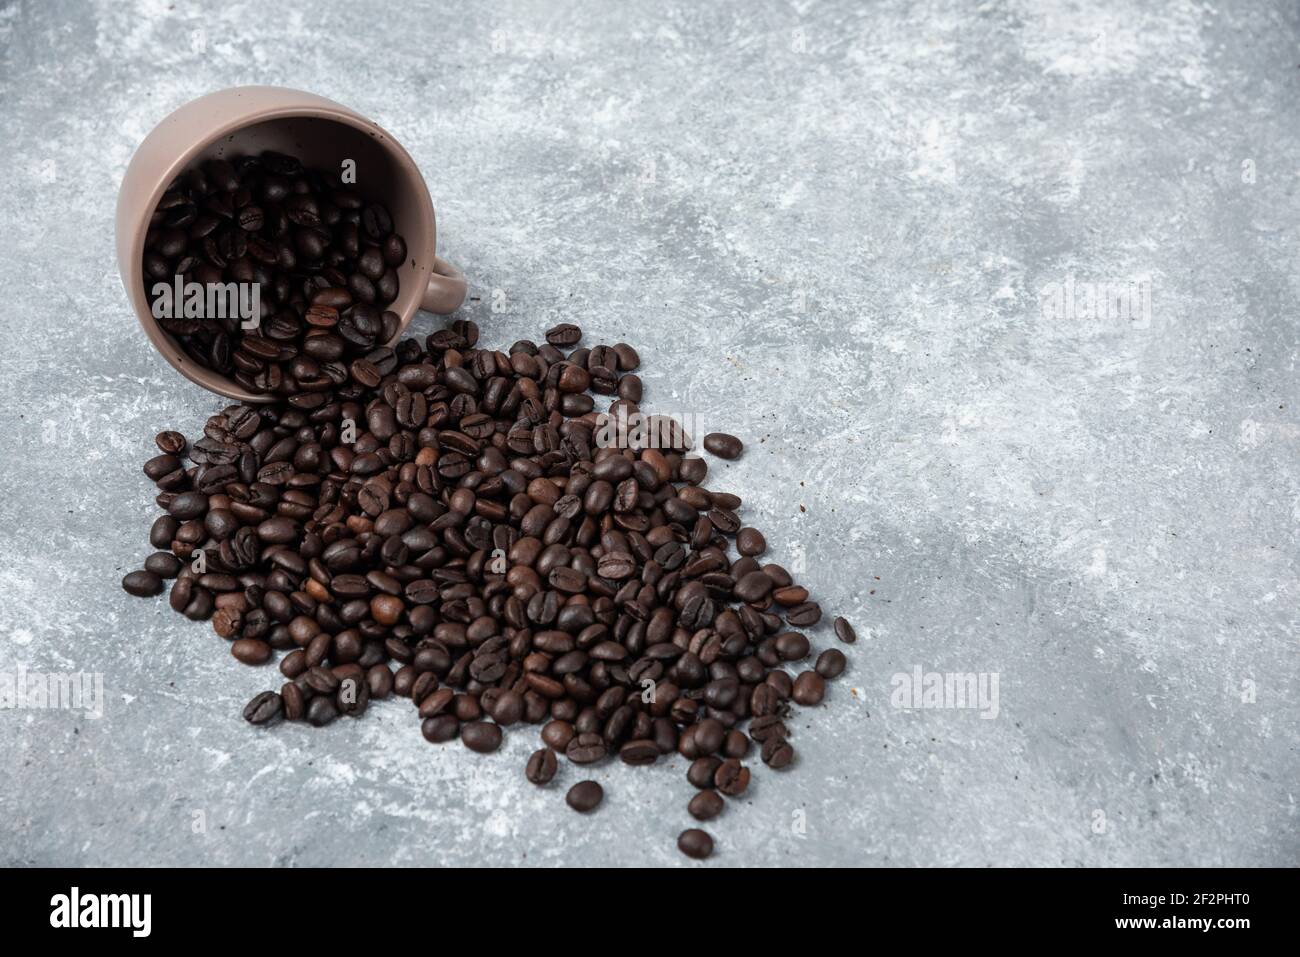 Aromatic roasted coffee beans out of cup on marble surface Stock Photo